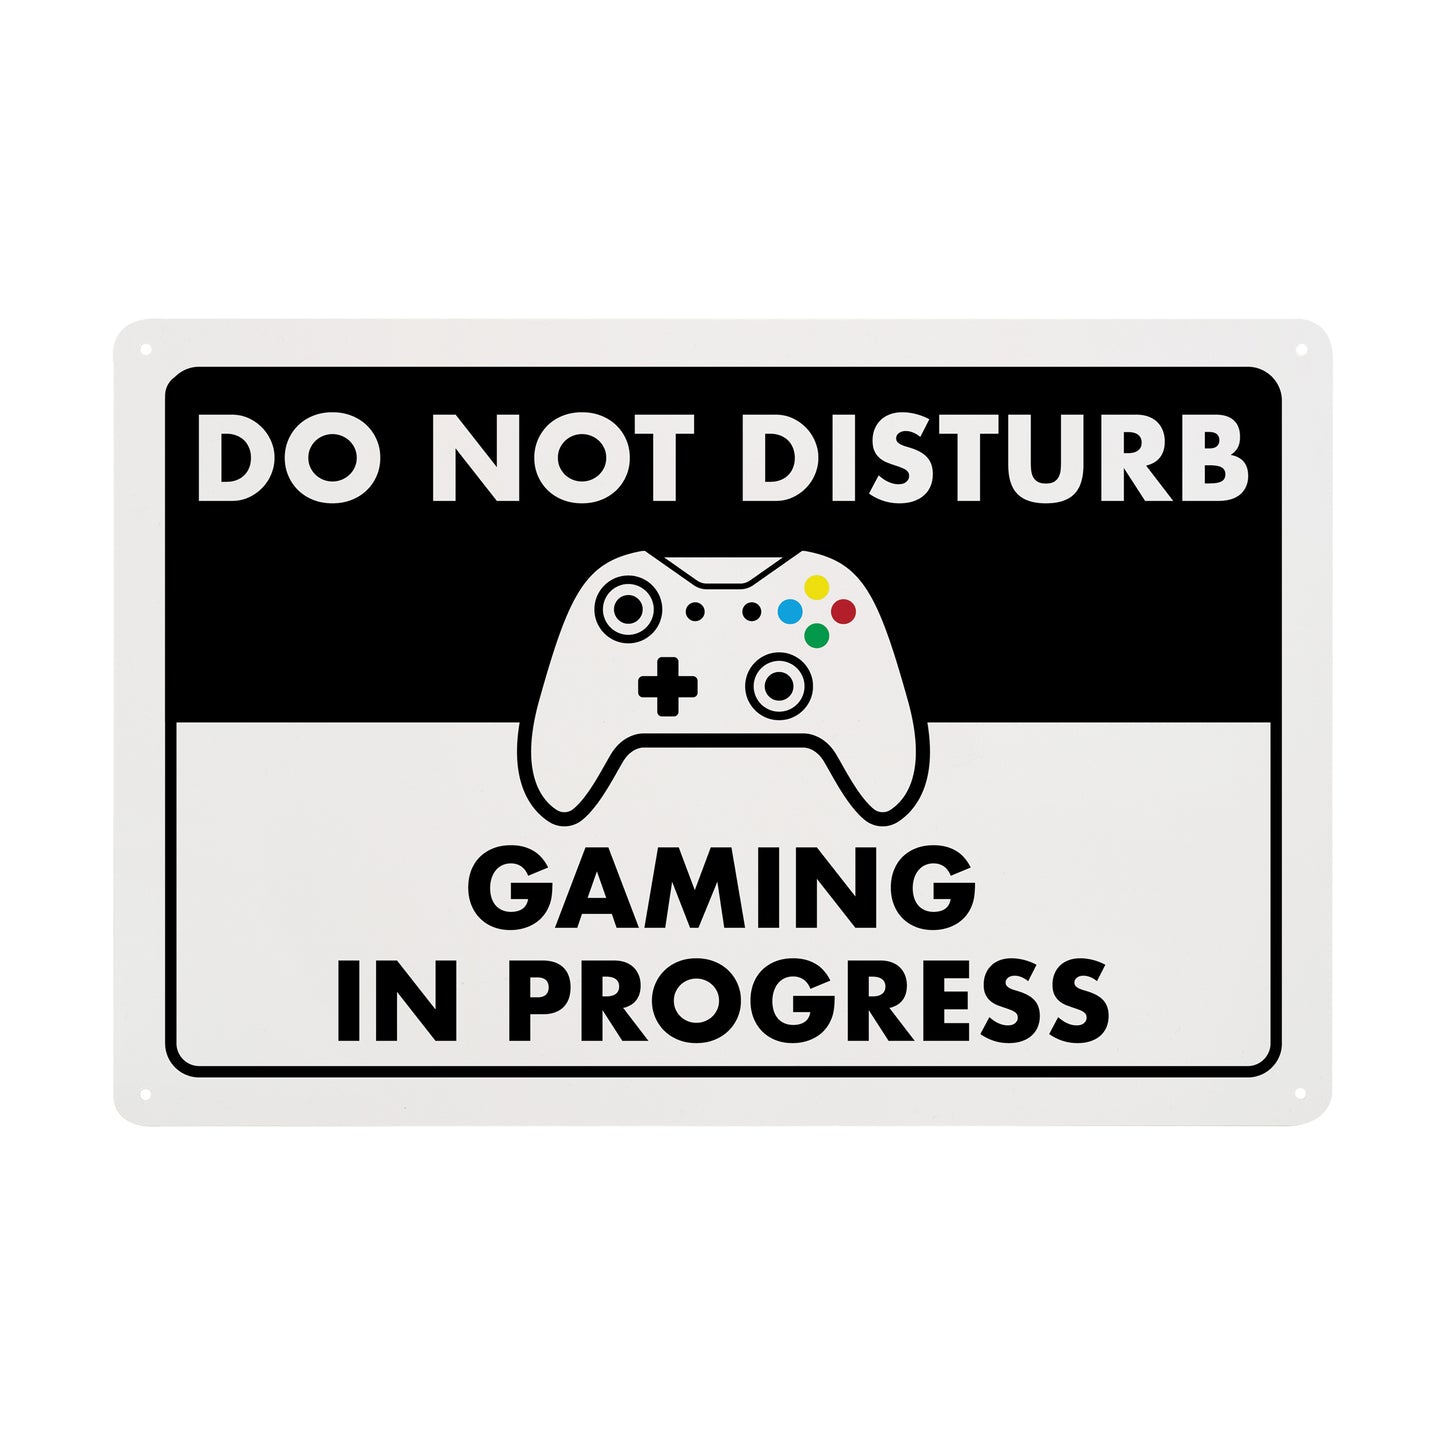 Do Not Disturb - Gaming in Progress - 8" x 12" Funny Plastic (PVC) Sign (With Pre-Drilled Holes for Easy Mounting)